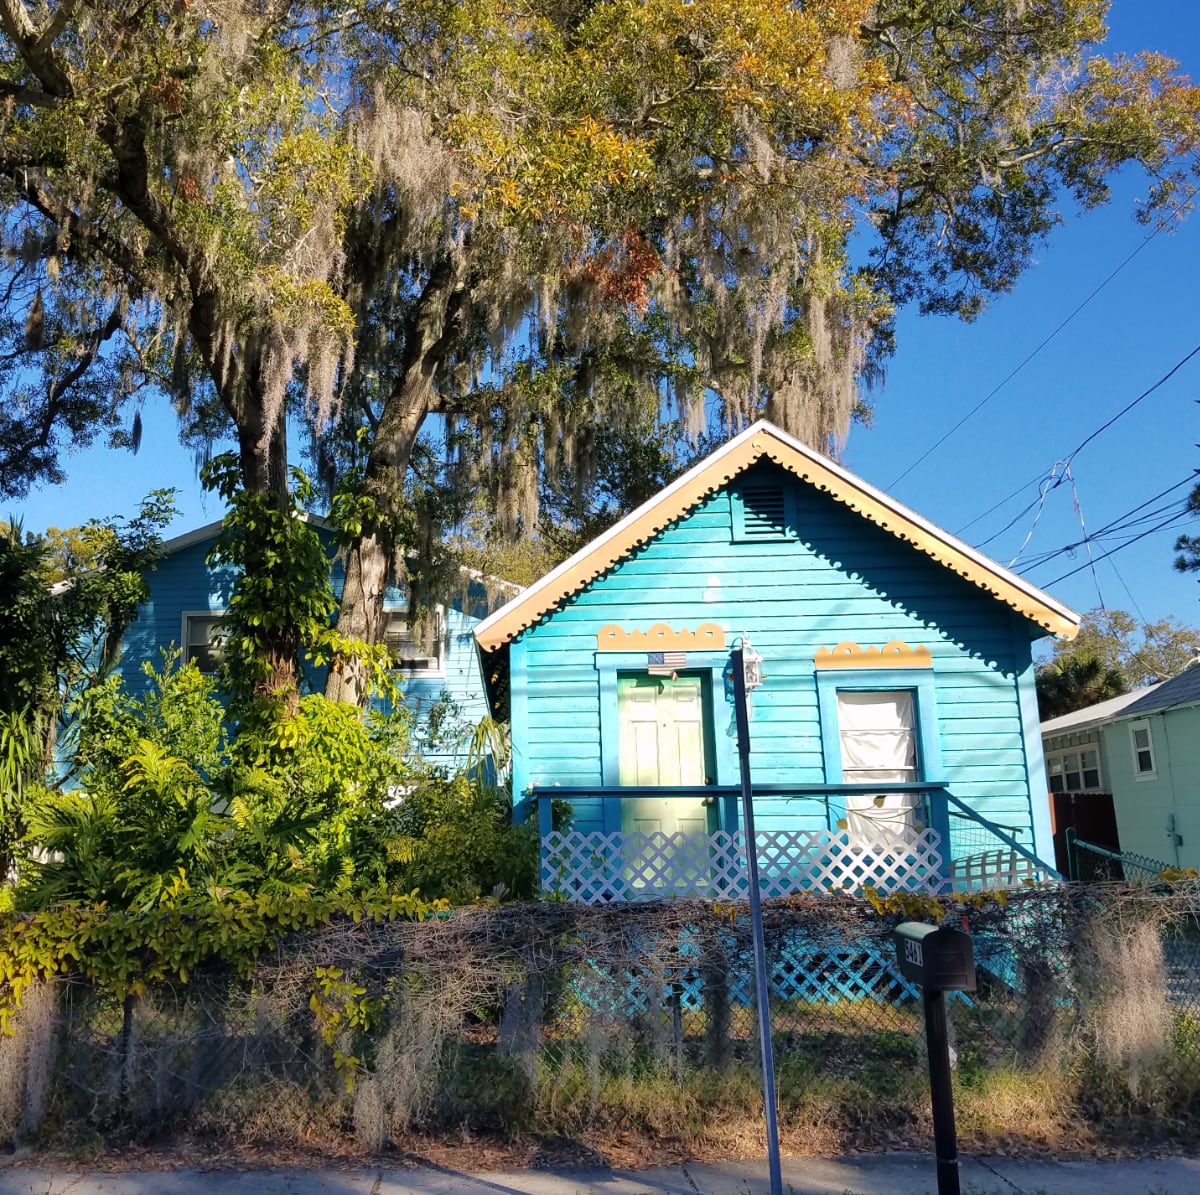 A tiny turquoise fixer-upper in Gulfport Florida